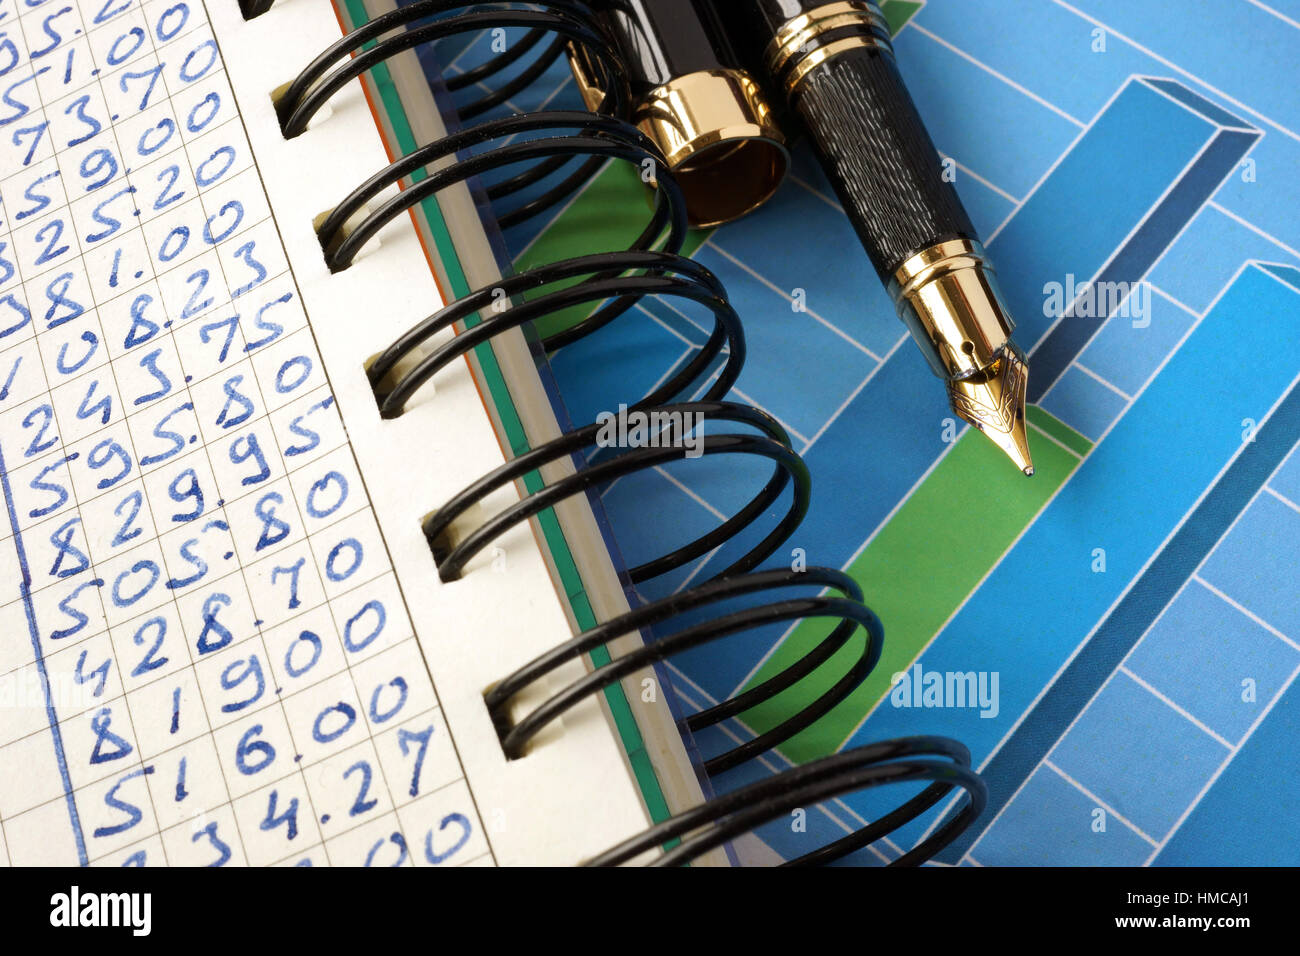 Financial graphs on a wooden surface. Business concept. Stock Photo